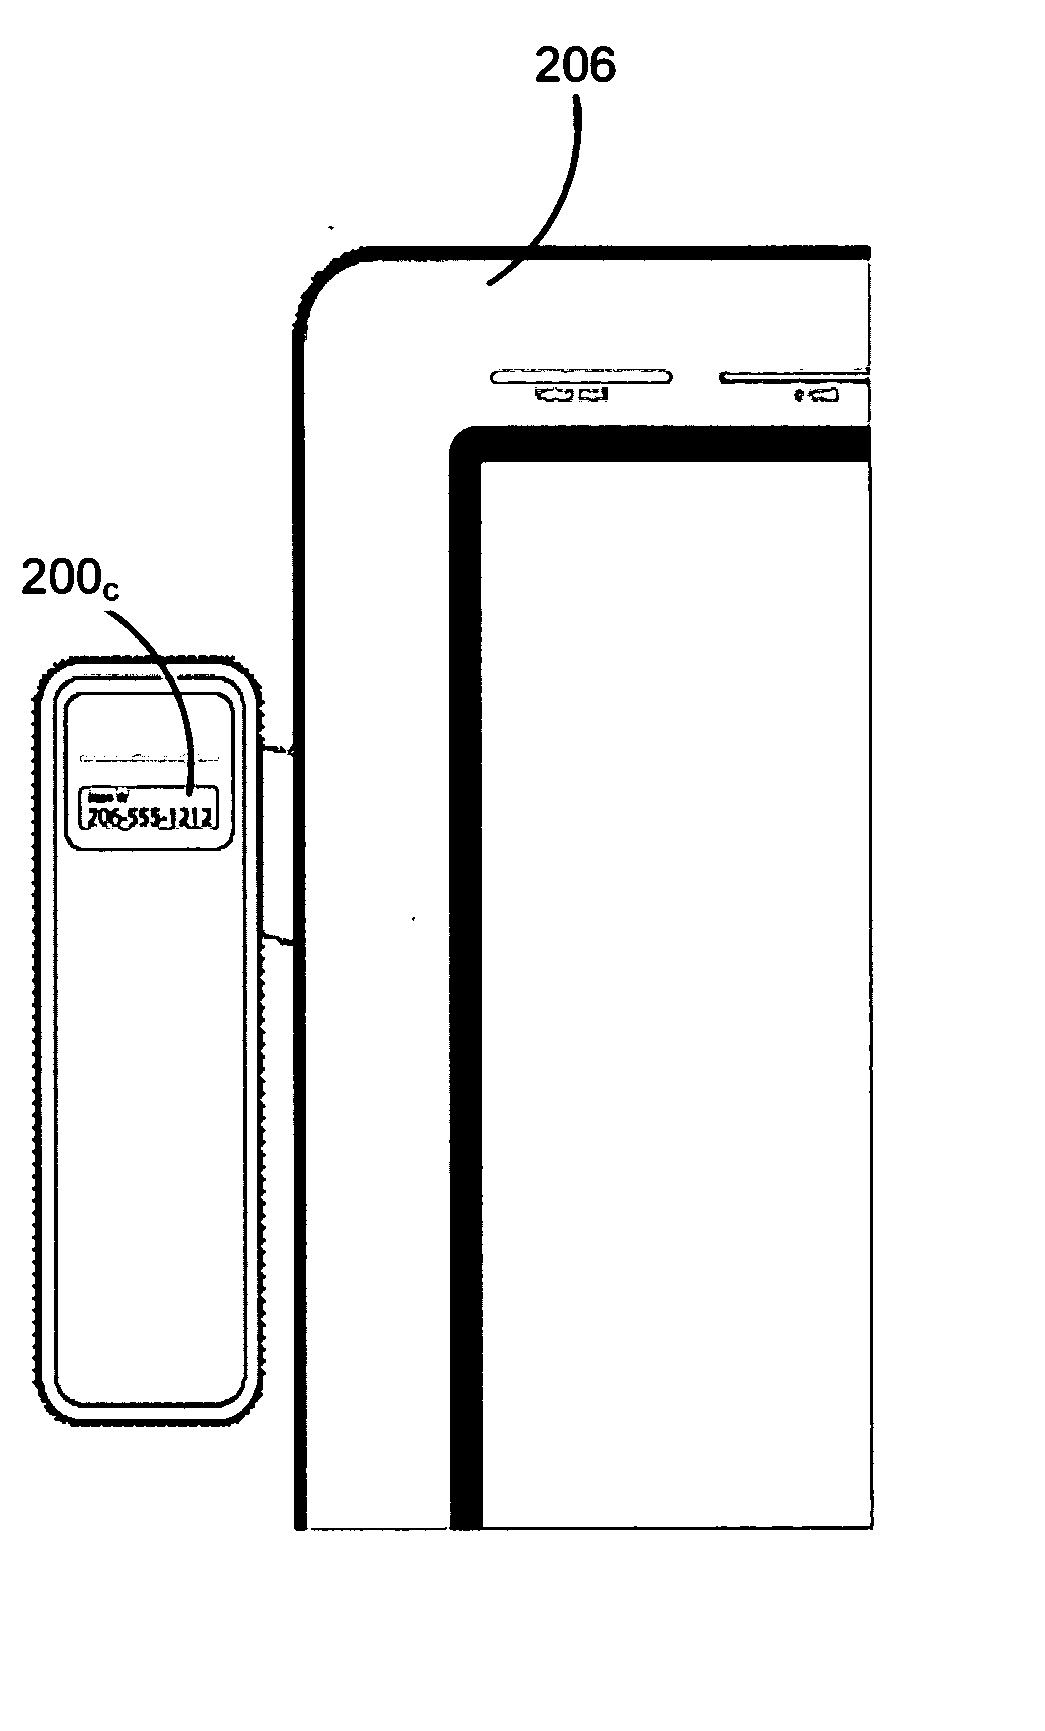 Auxiliary display system architecture